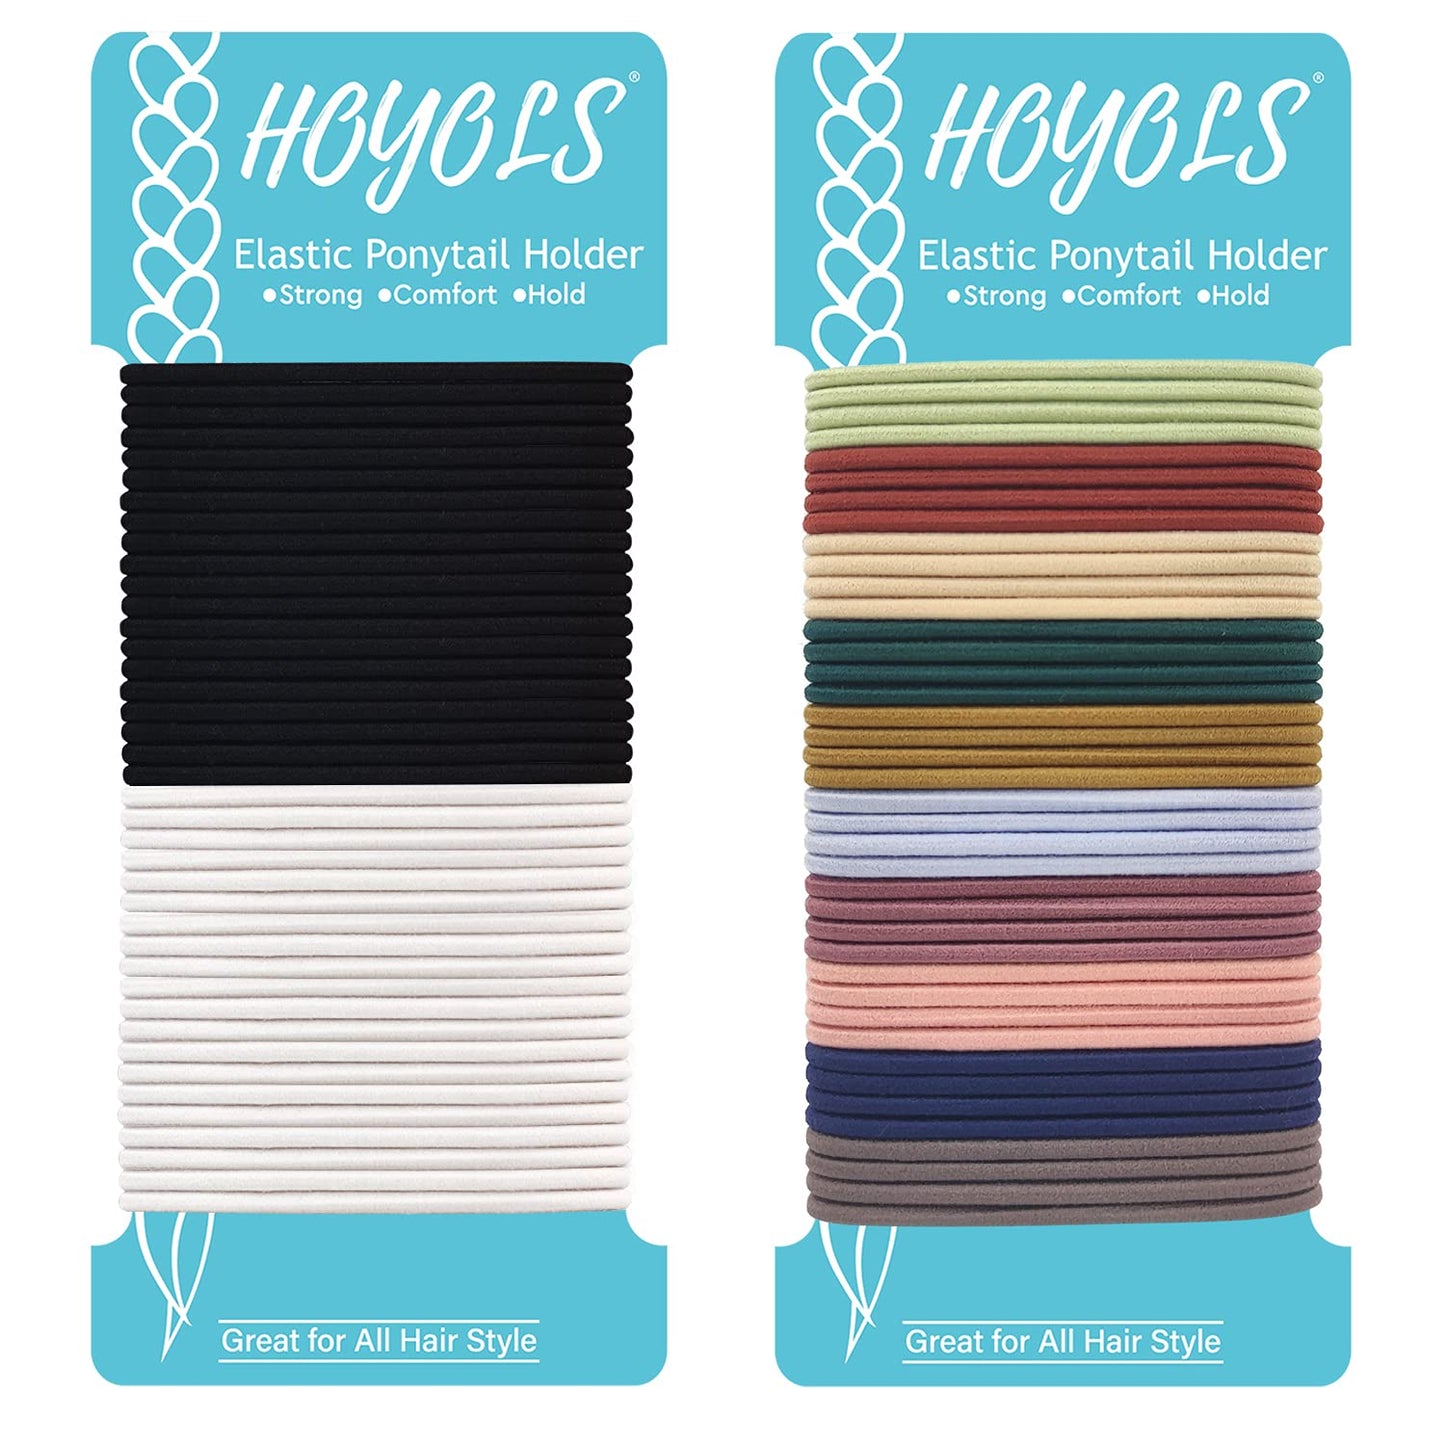 HOYOLS Hair Elastics Bands Assorted Color Black White for Women Girl Kids Fine Curly Thin Hair, No Metal Ponytail Holder Hair Ties Accessories Gentle Hold No Snag 2mm 80 Count